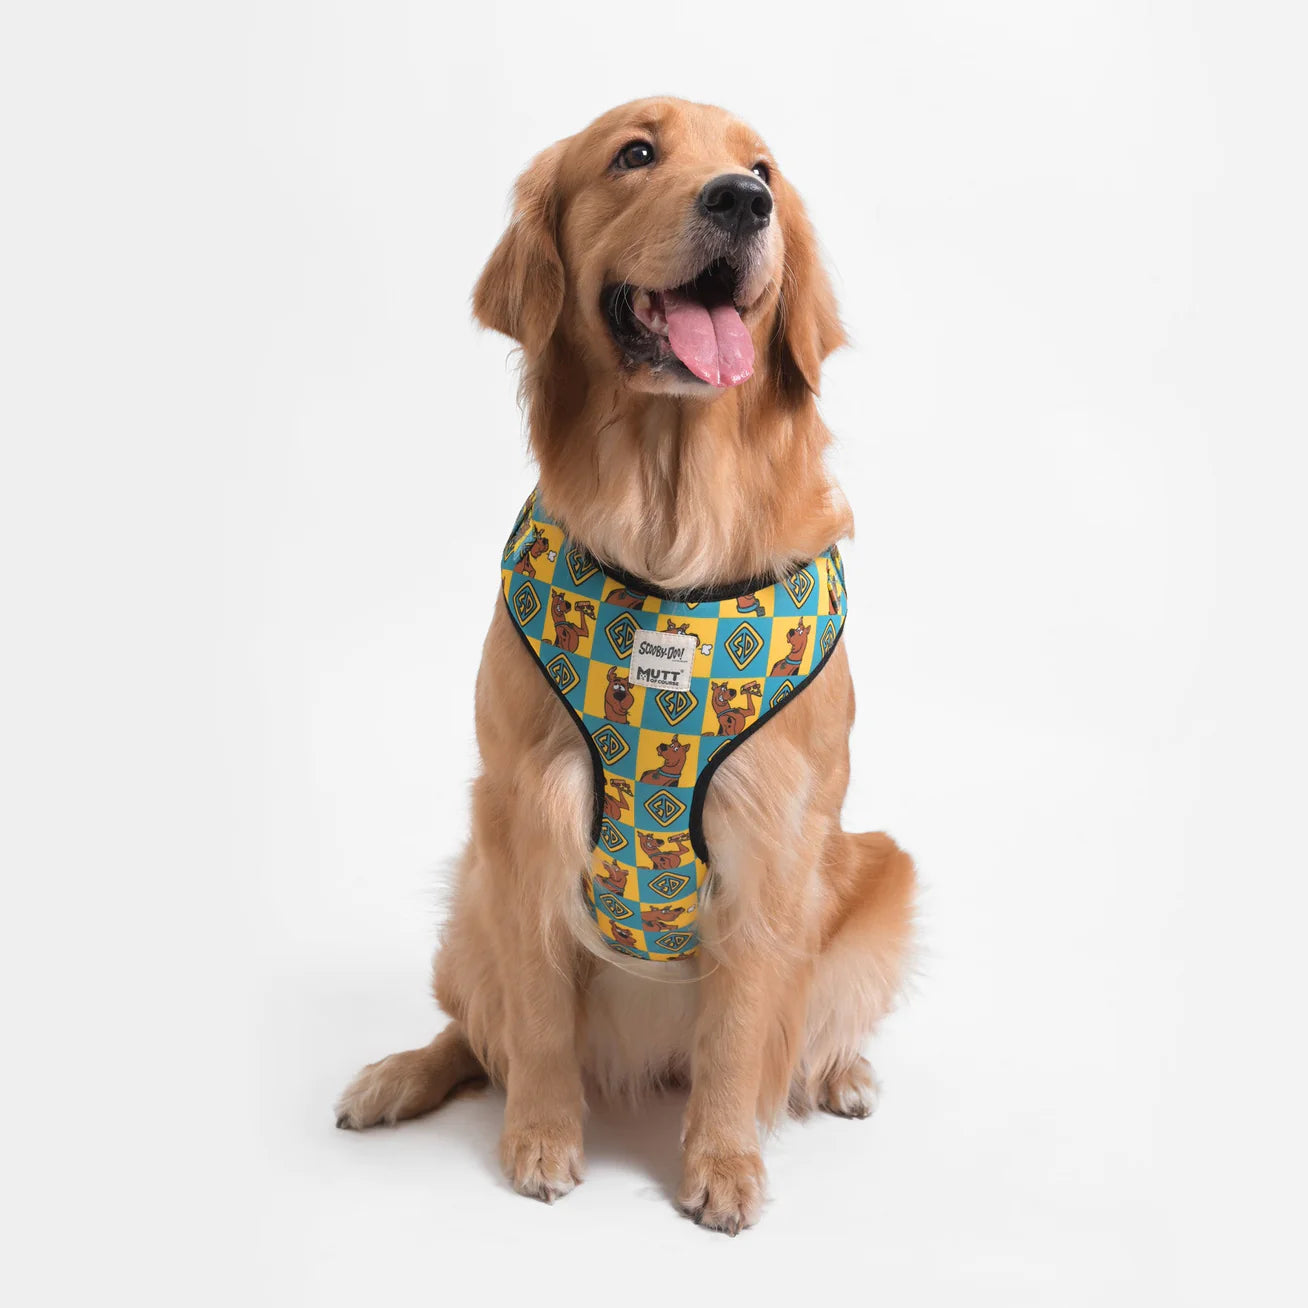 Mutt of Course Scooby Dooby Doo Harness For Dogs